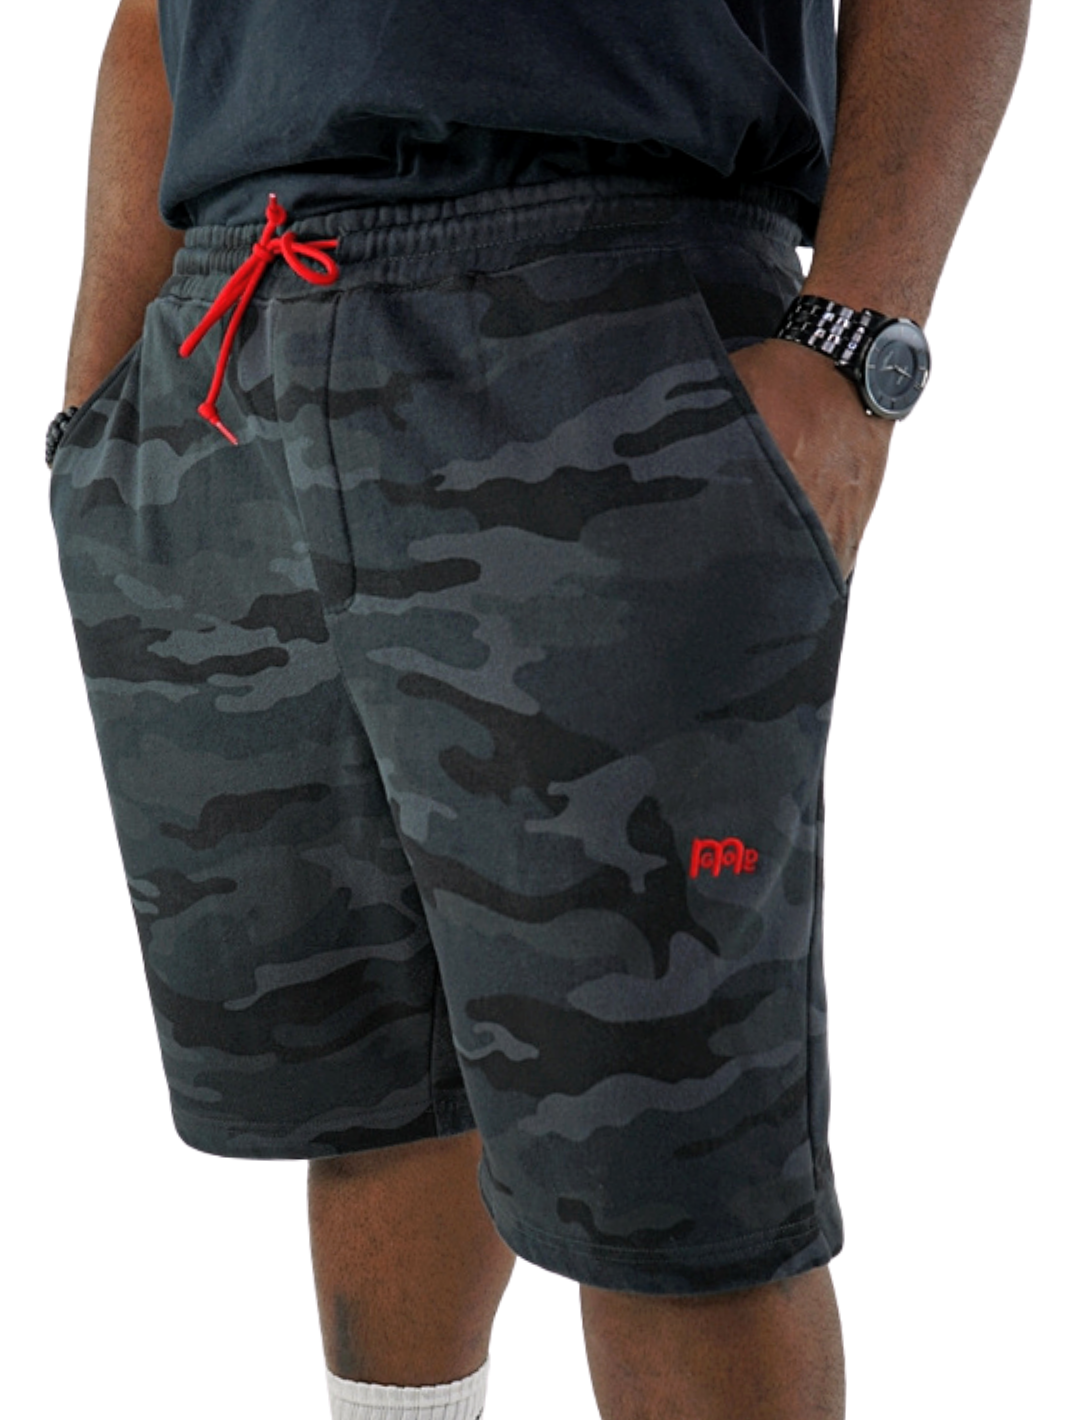 These actively casual GODinme shorts come in a Black or Green Camouflage design. Complete with a bold embroidered logo and a shoestring draw cord in Red, to make a faithful statement wherever you go.